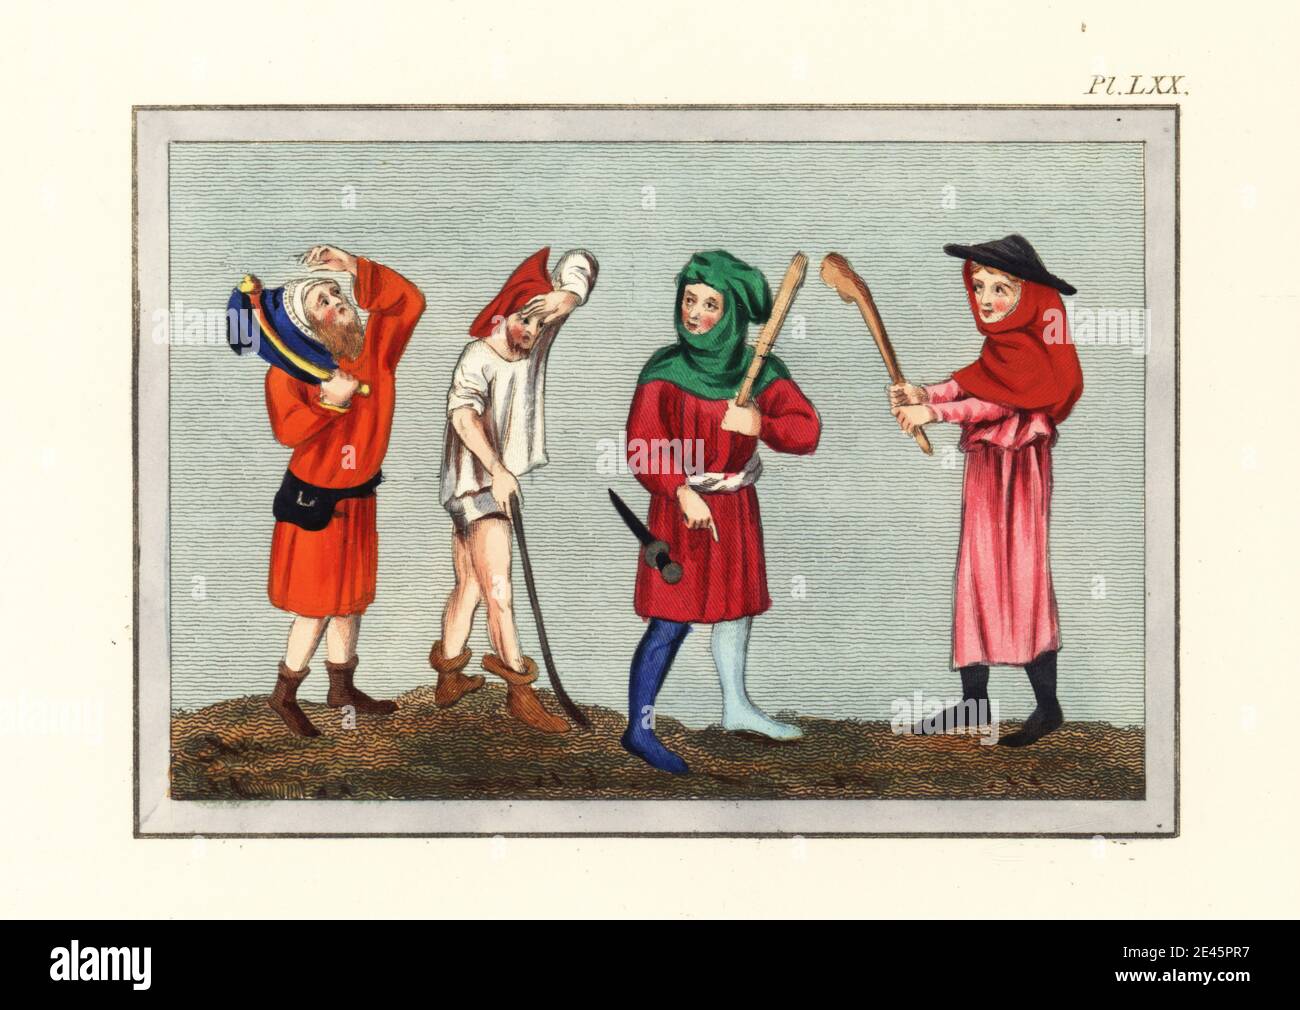 Rustics etc of the 14th century. Man with cudgel from Guyart des Moulins Bible historiale, Royal MS 15 B iii, man in short pants and boots and man in parti-coloured hose with cudgel and dagger f.60 from Chroniques de France ou de St Denis, Royal MS 20 C vii, and man in cap, hood and tunic with cudgel from Matfre Ermengaud's Breviari d'Amor, Royal MS 19 C i. Handcoloured engraving by Joseph Strutt from his Complete View of the Dress and Habits of the People of England, Henry Bohn, London, 1842. Stock Photo